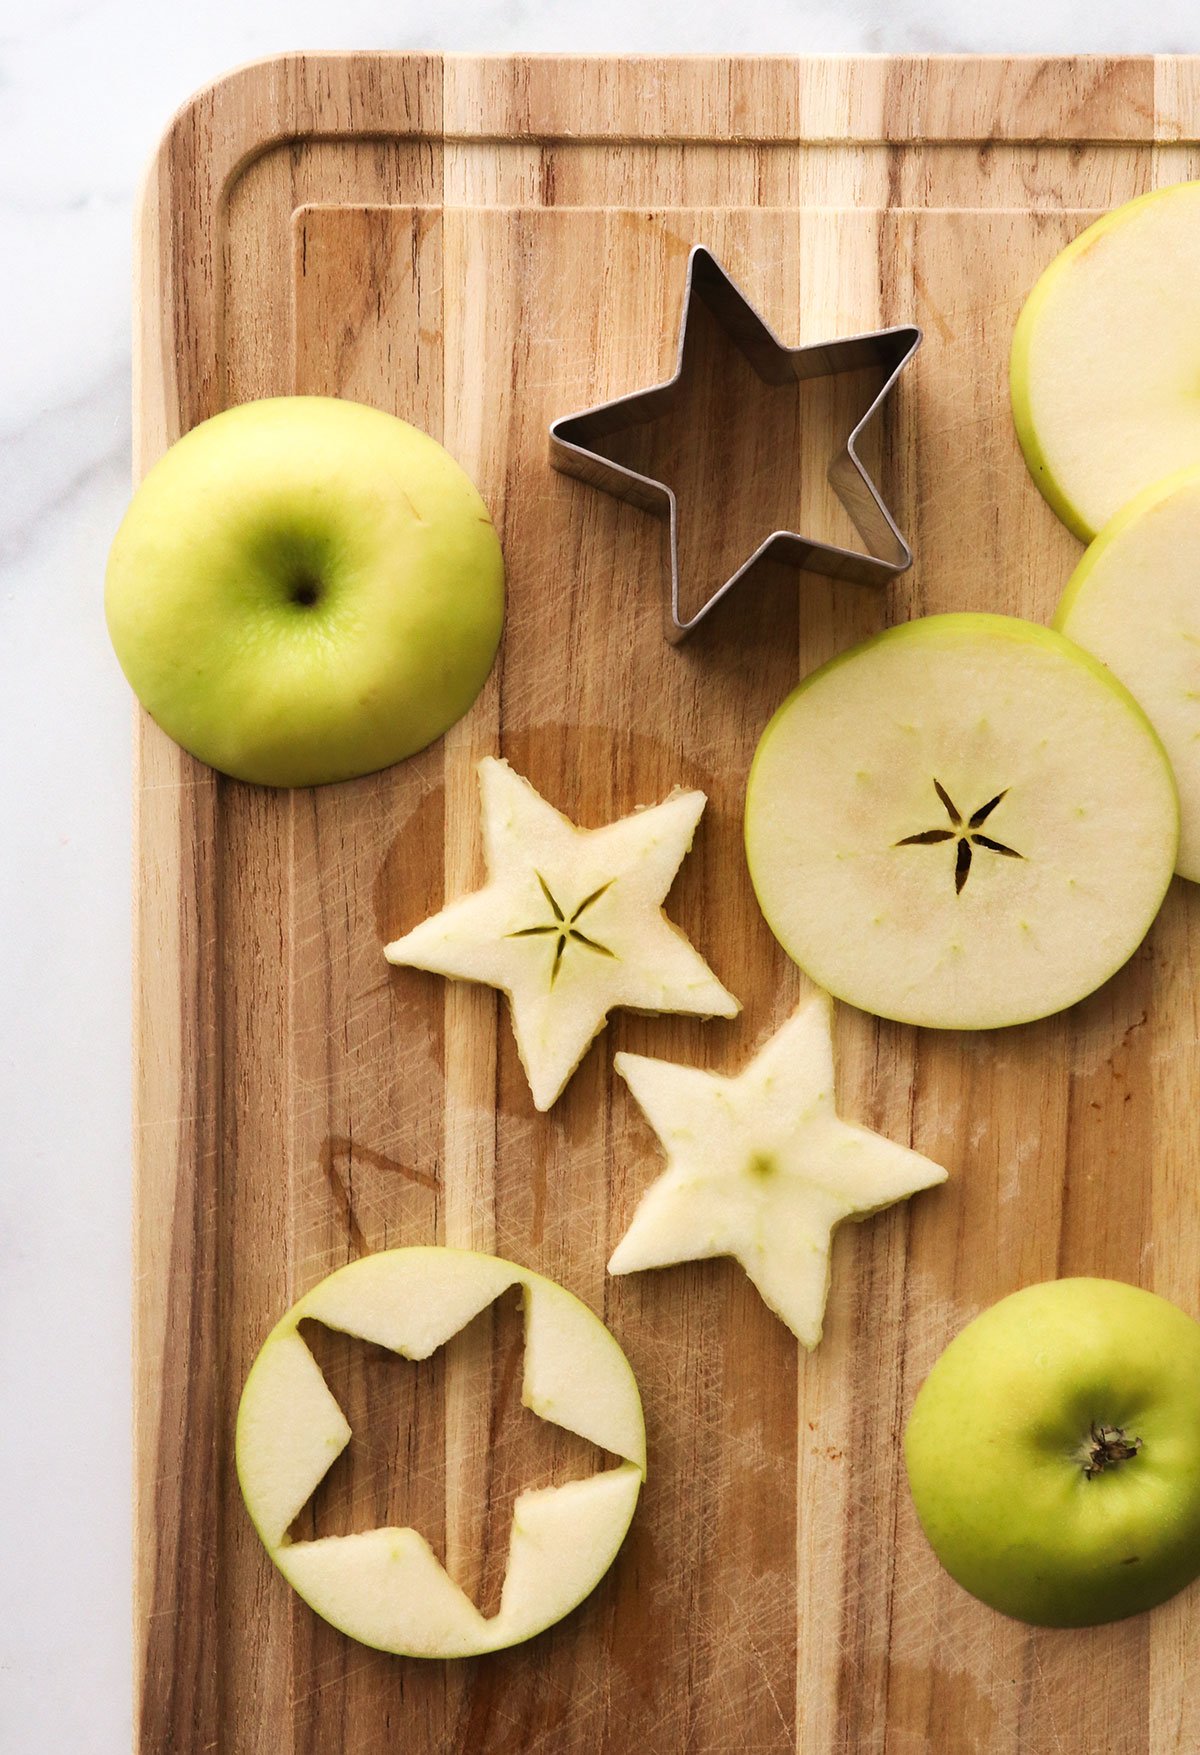 star cookie cutter used to slice an apple into stars.